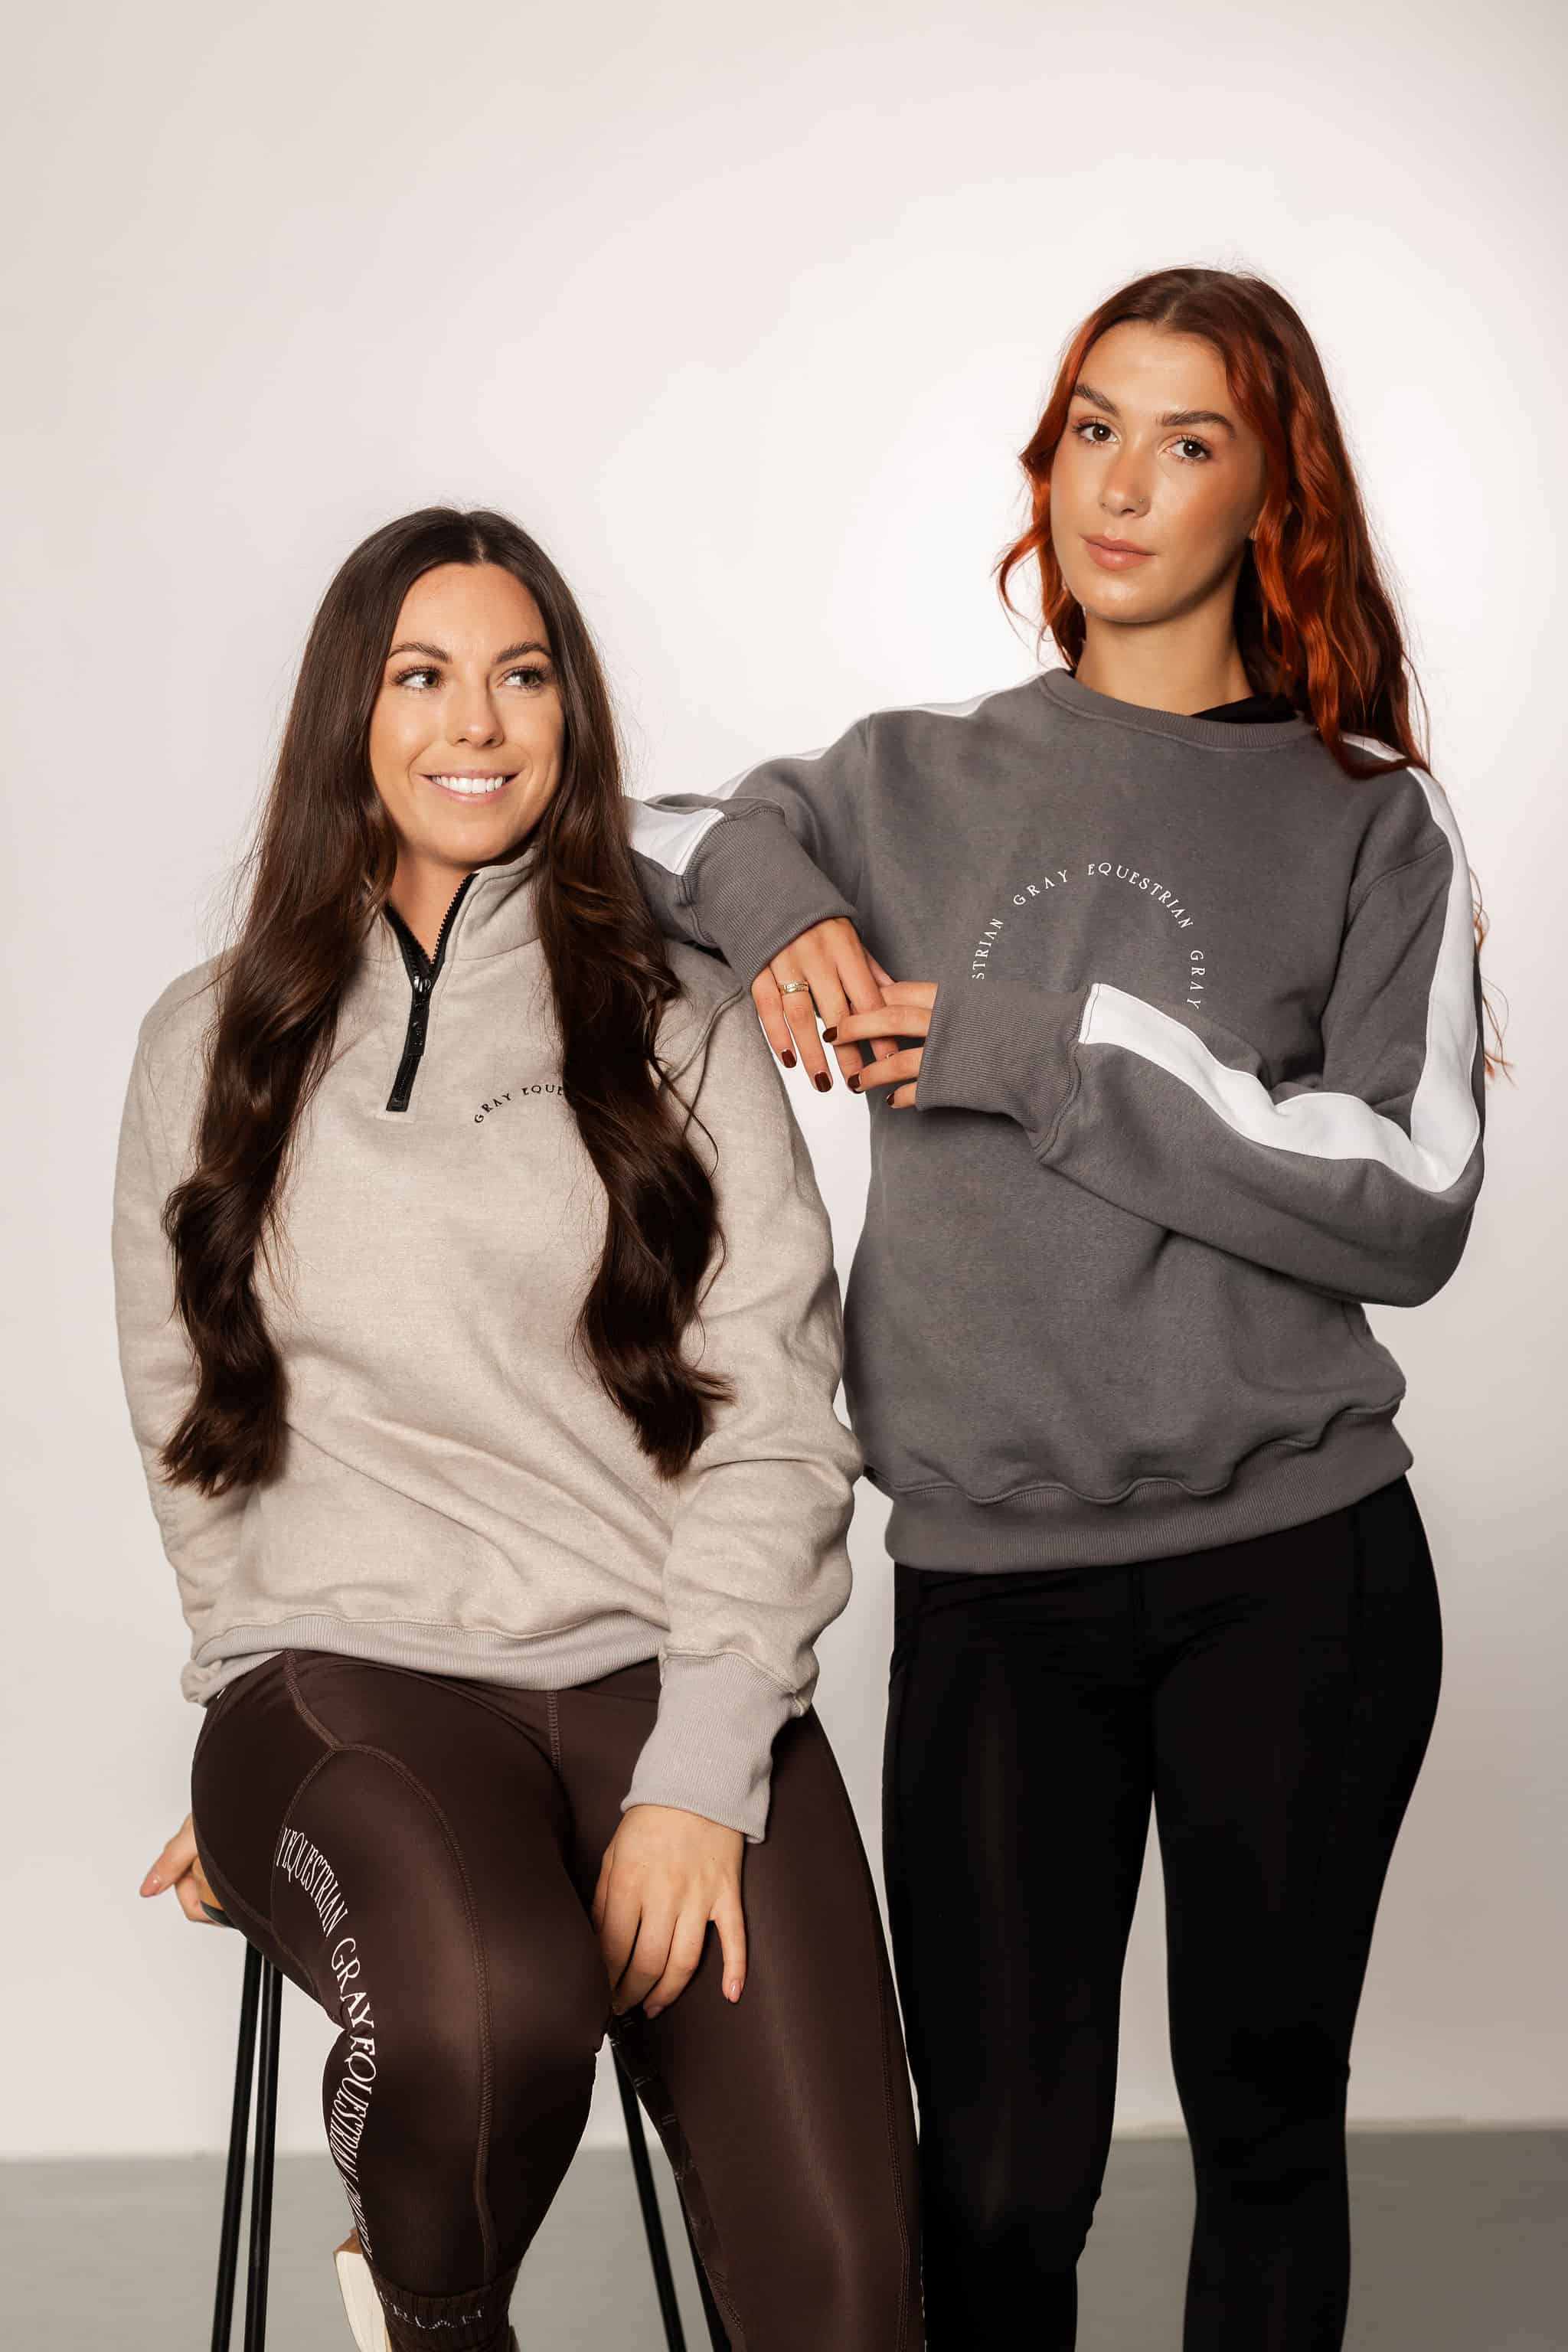 Two models standing side by side. The model on the left is wearing out taupe grey 1/4 zip sweatshirt and brown leggings. The model on the right is wearing our grey and white sweatshirt and black leggings.